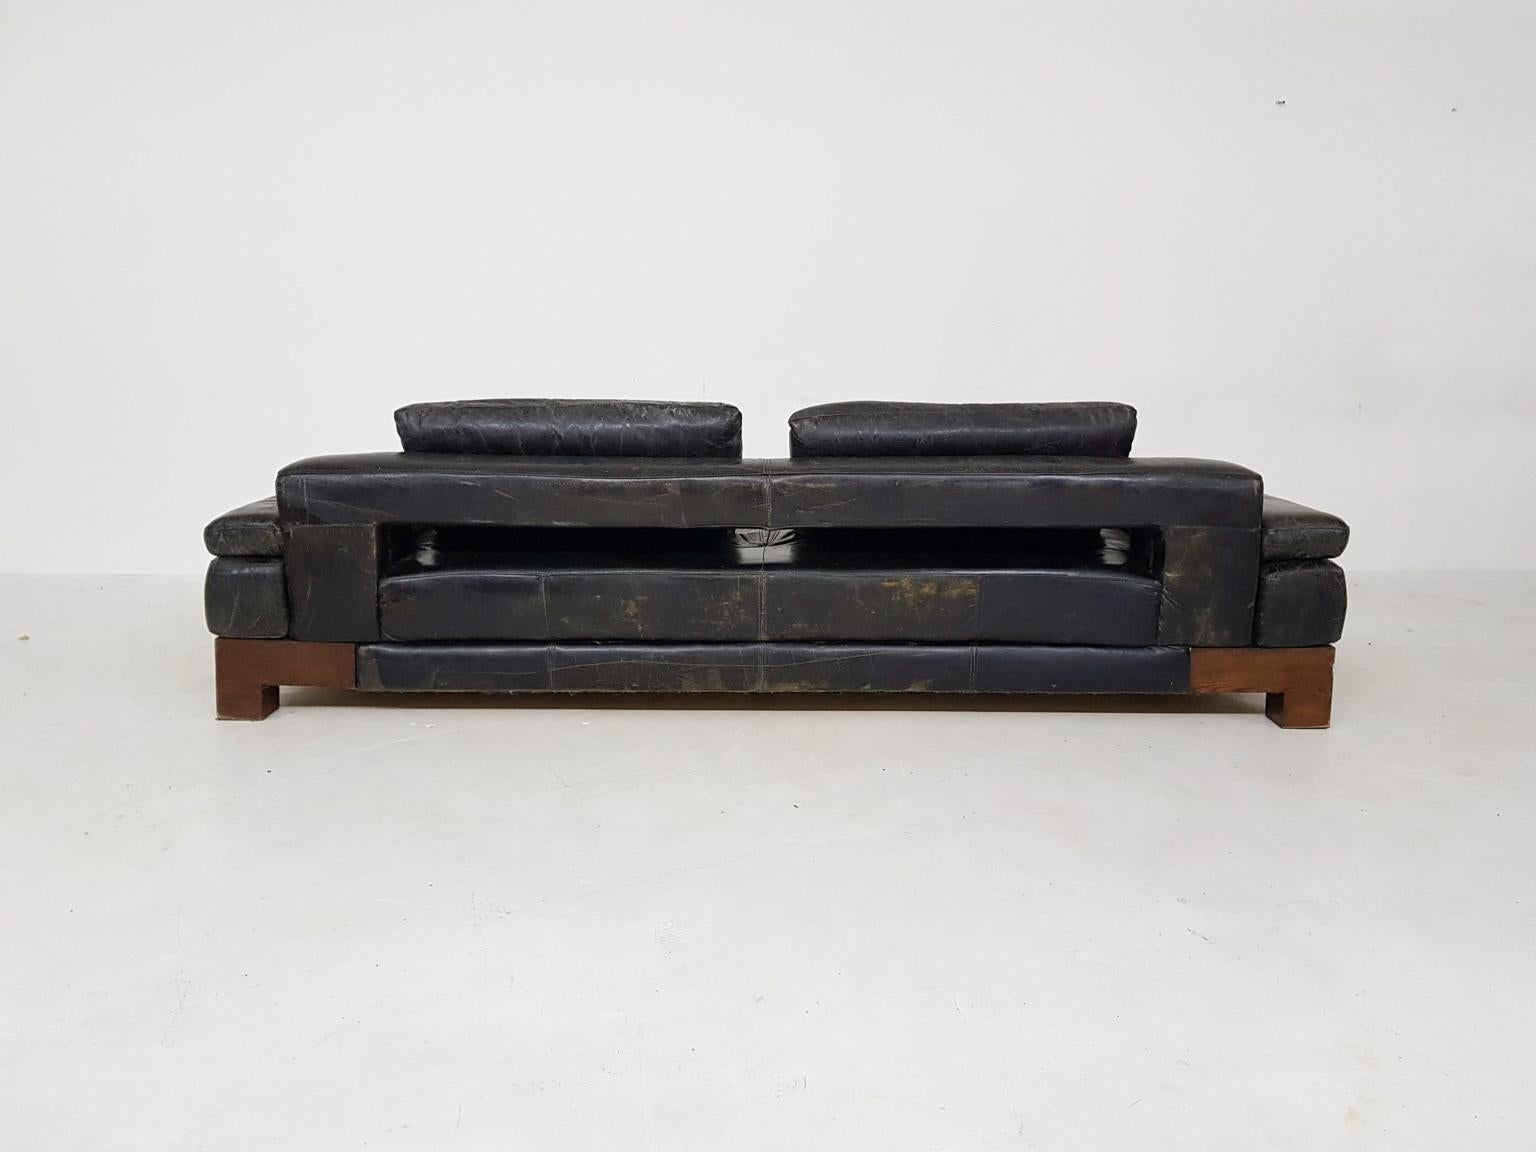 Late 20th Century Mid-Century Modern Leather and Wenge Sofa or Daybed